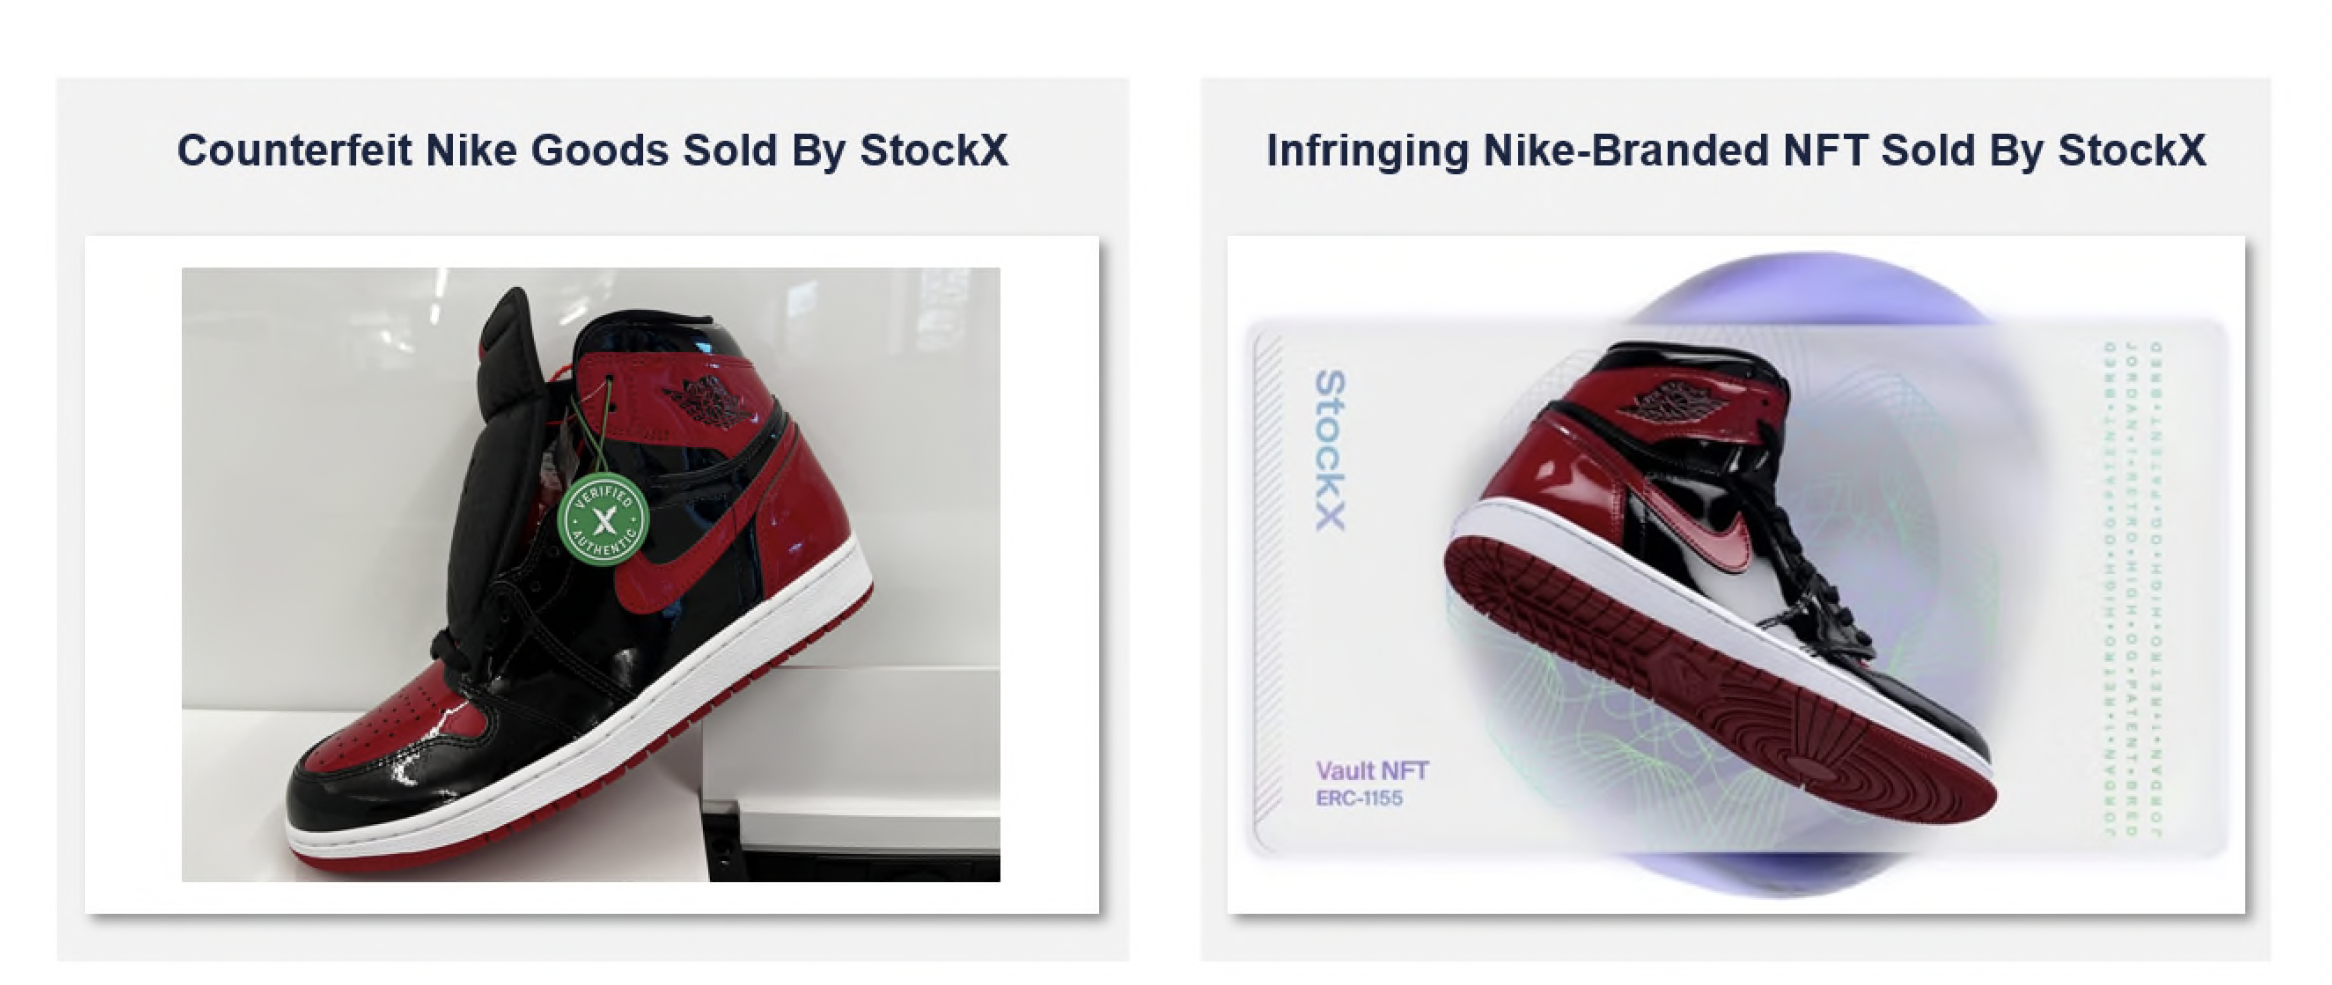 Get a Pair of Off-White x Jordan 1s for Retail! [UPDATED] - StockX News